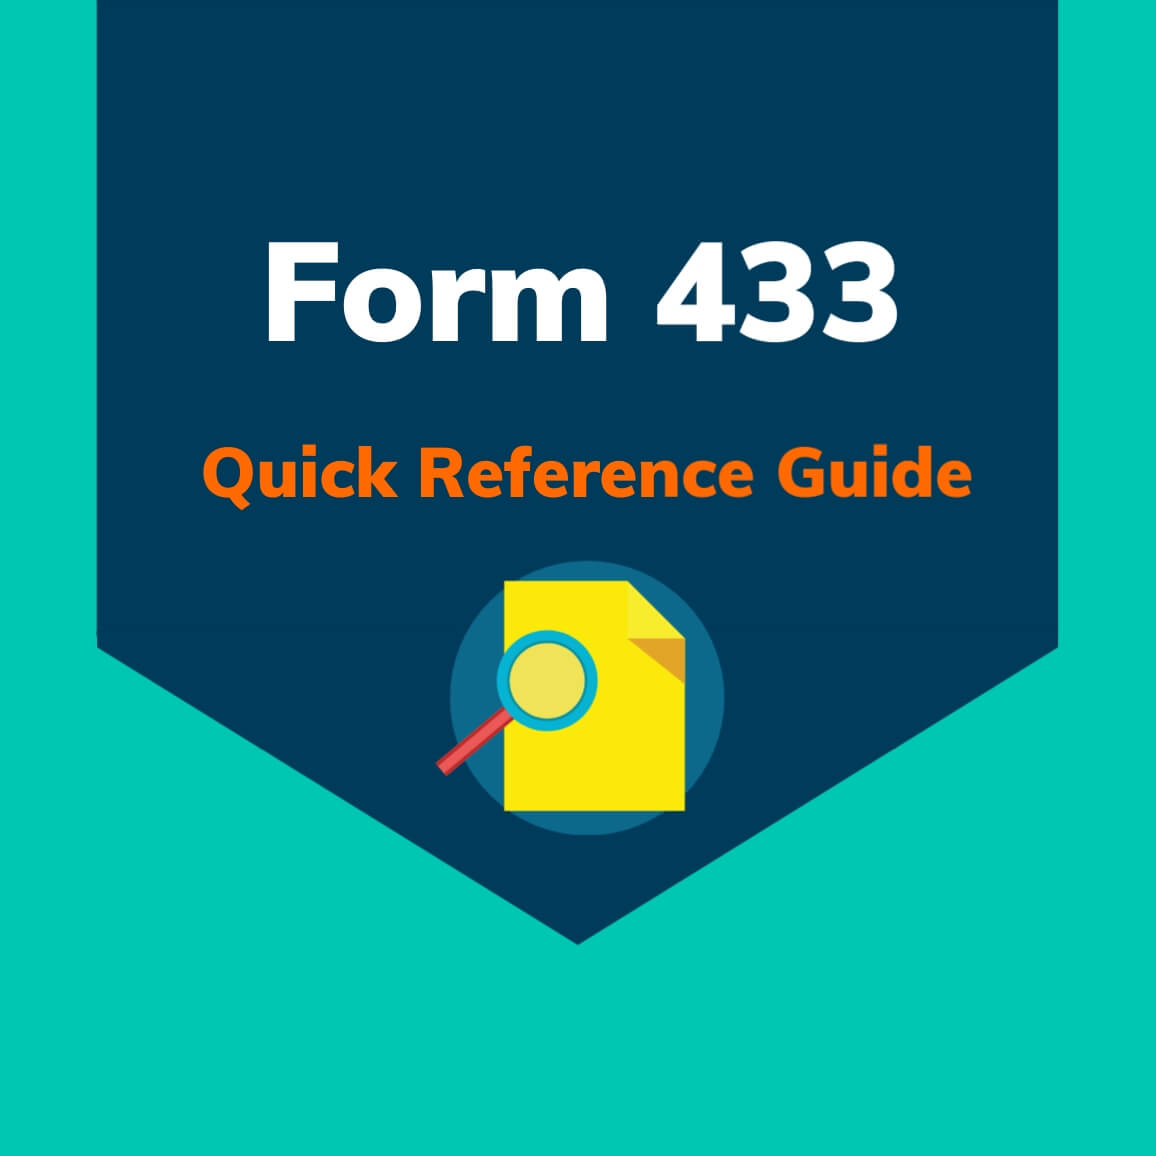 Form-433-Quick-Reference-Quide pdf download